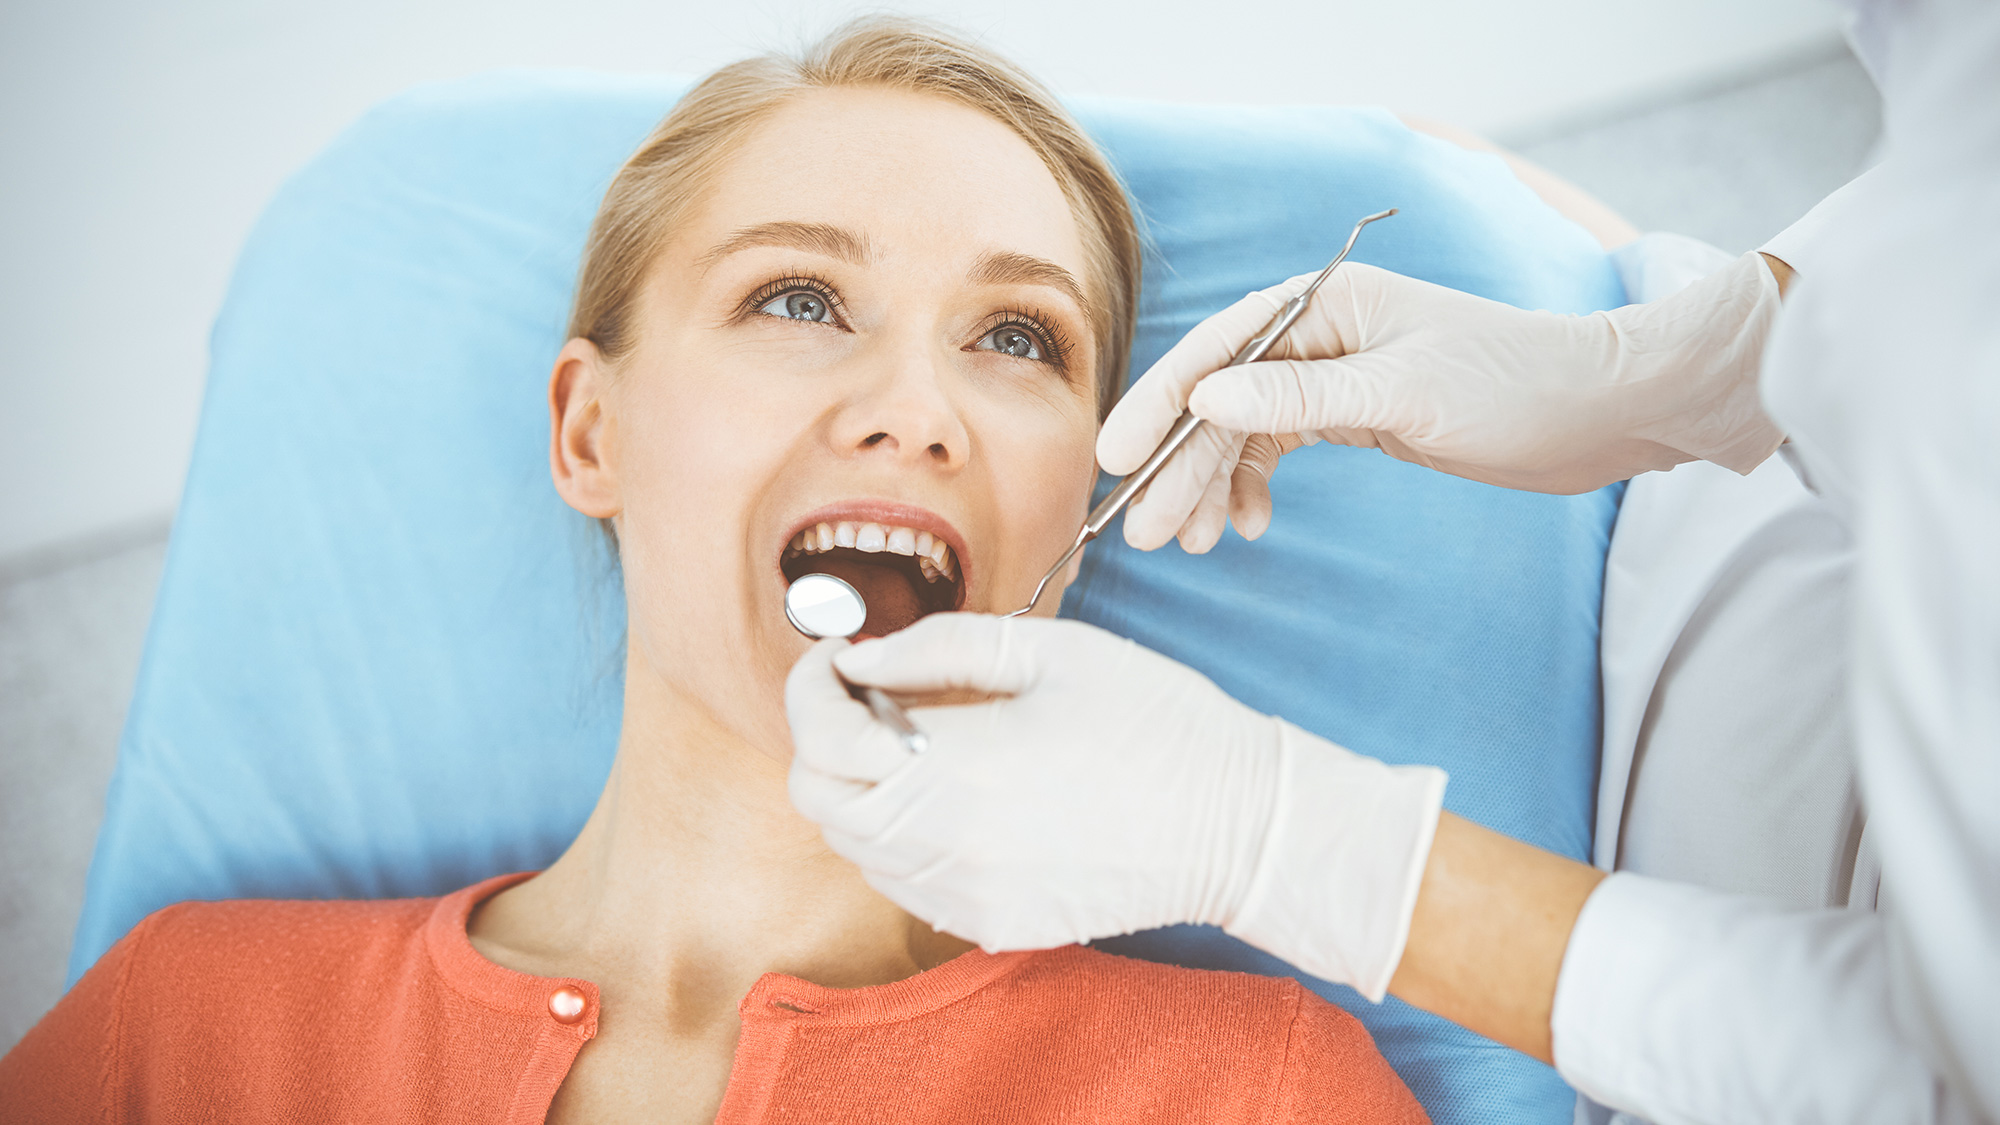 Woman at dentist Withers Perio Fairfax, VA